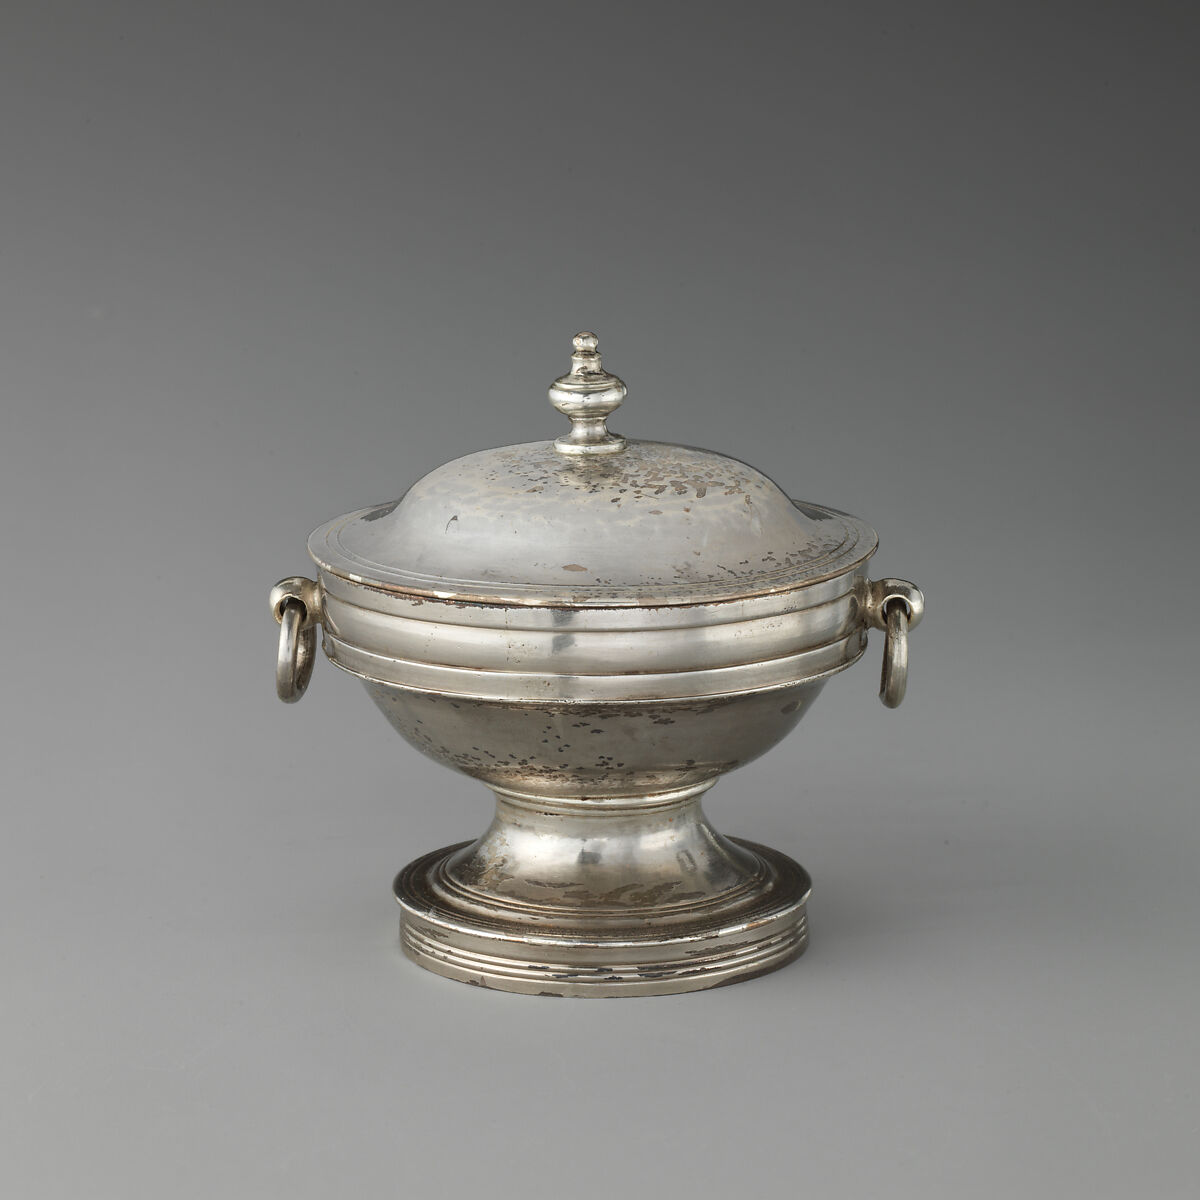 Miniature tureen with cover, Possibly by Thomas Howell (entered 1791), Silver, British, London 